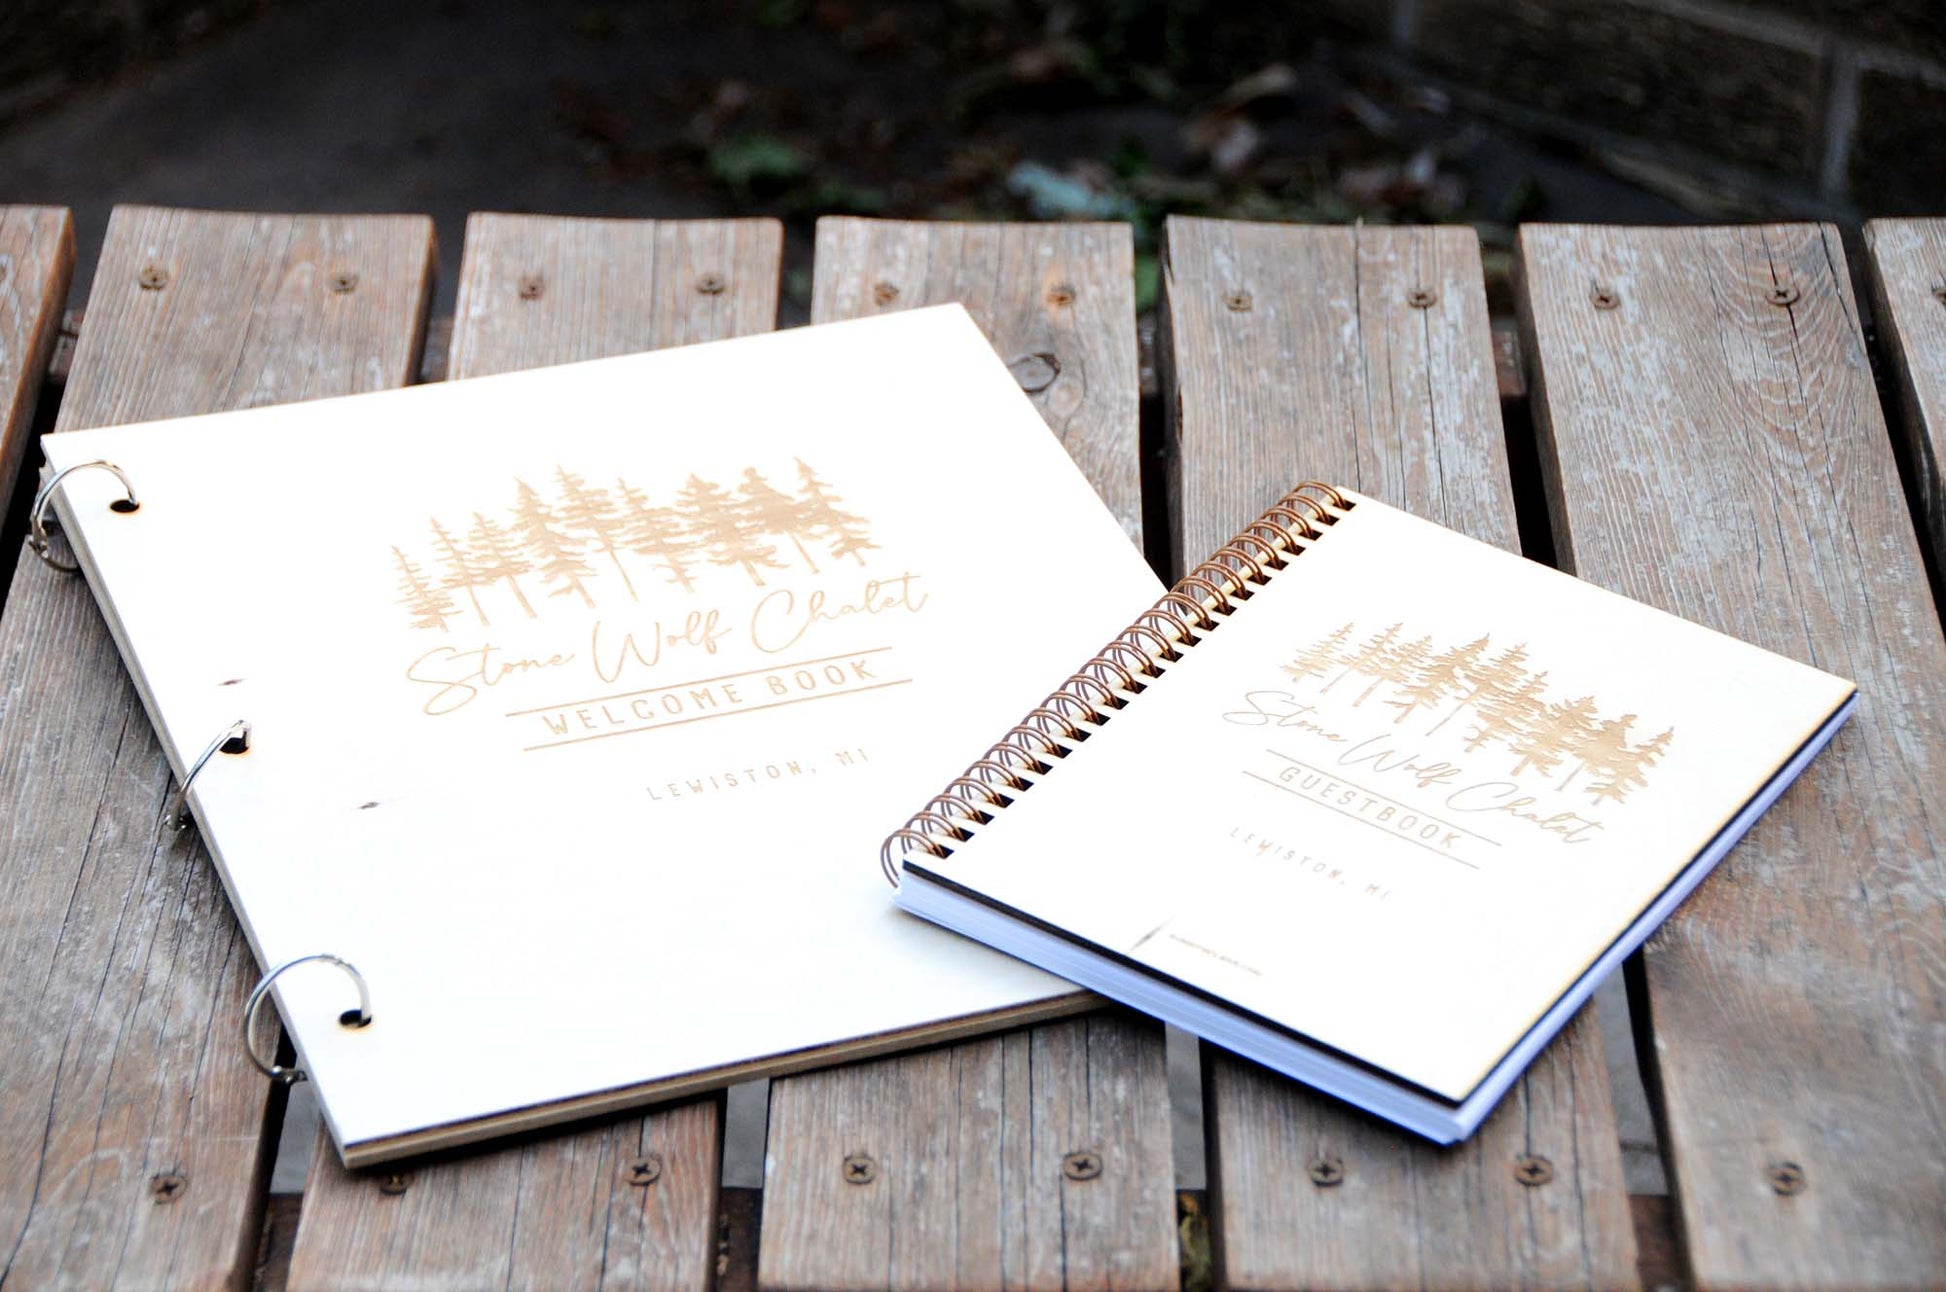 Cabin Guest Book: Sign in Book for Rustic Cottage Vacation Rental Home